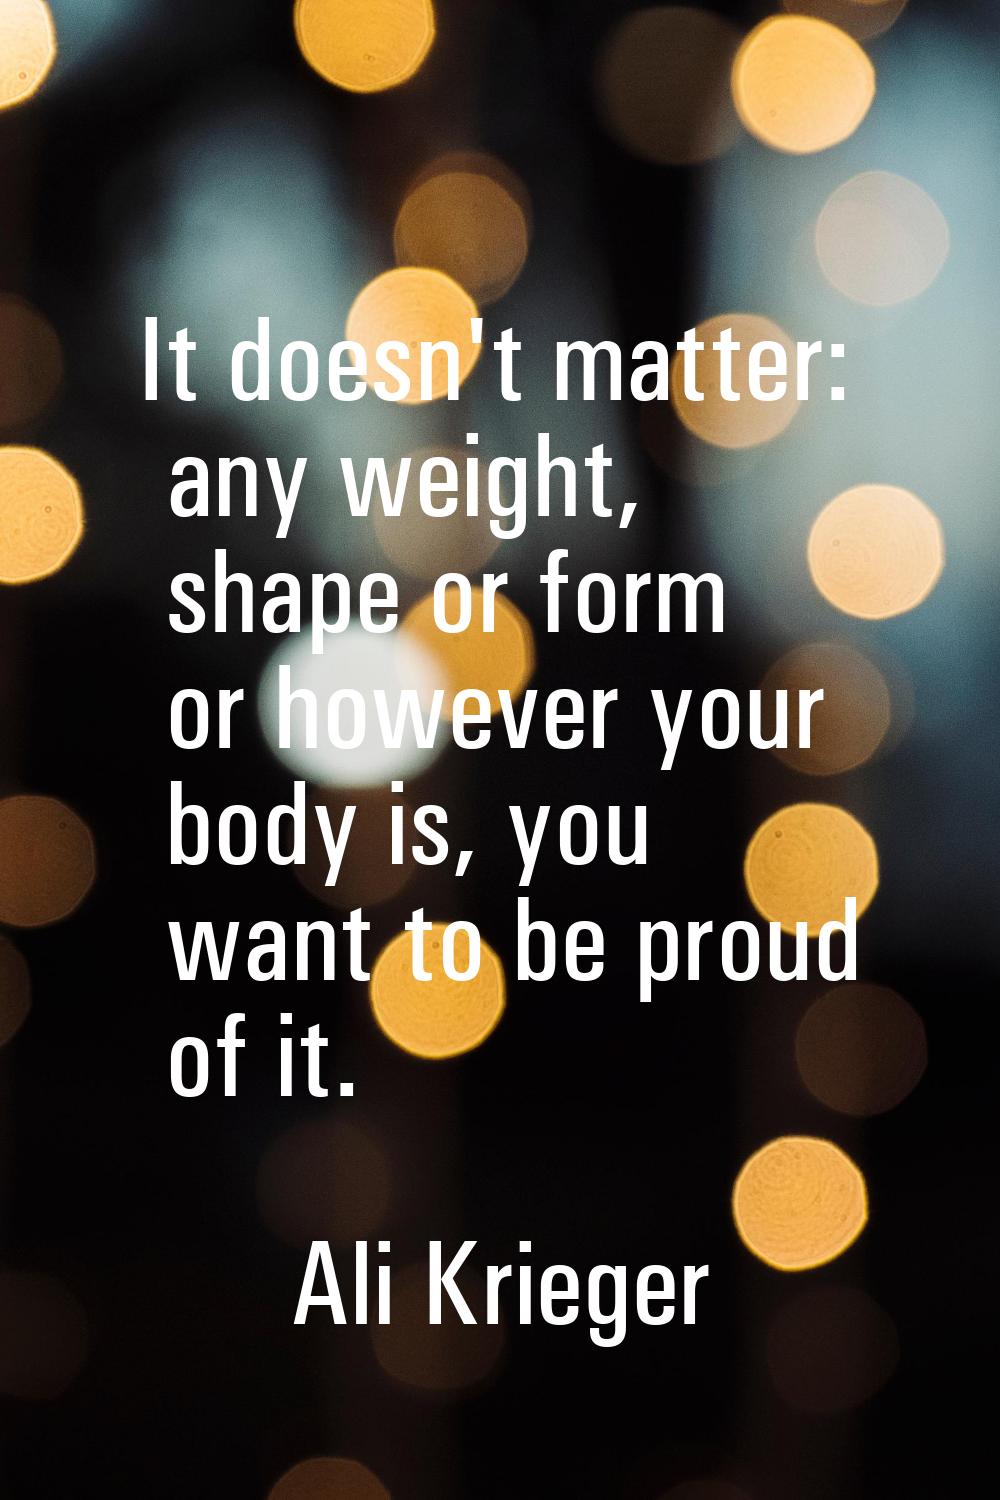 It doesn't matter: any weight, shape or form or however your body is, you want to be proud of it.